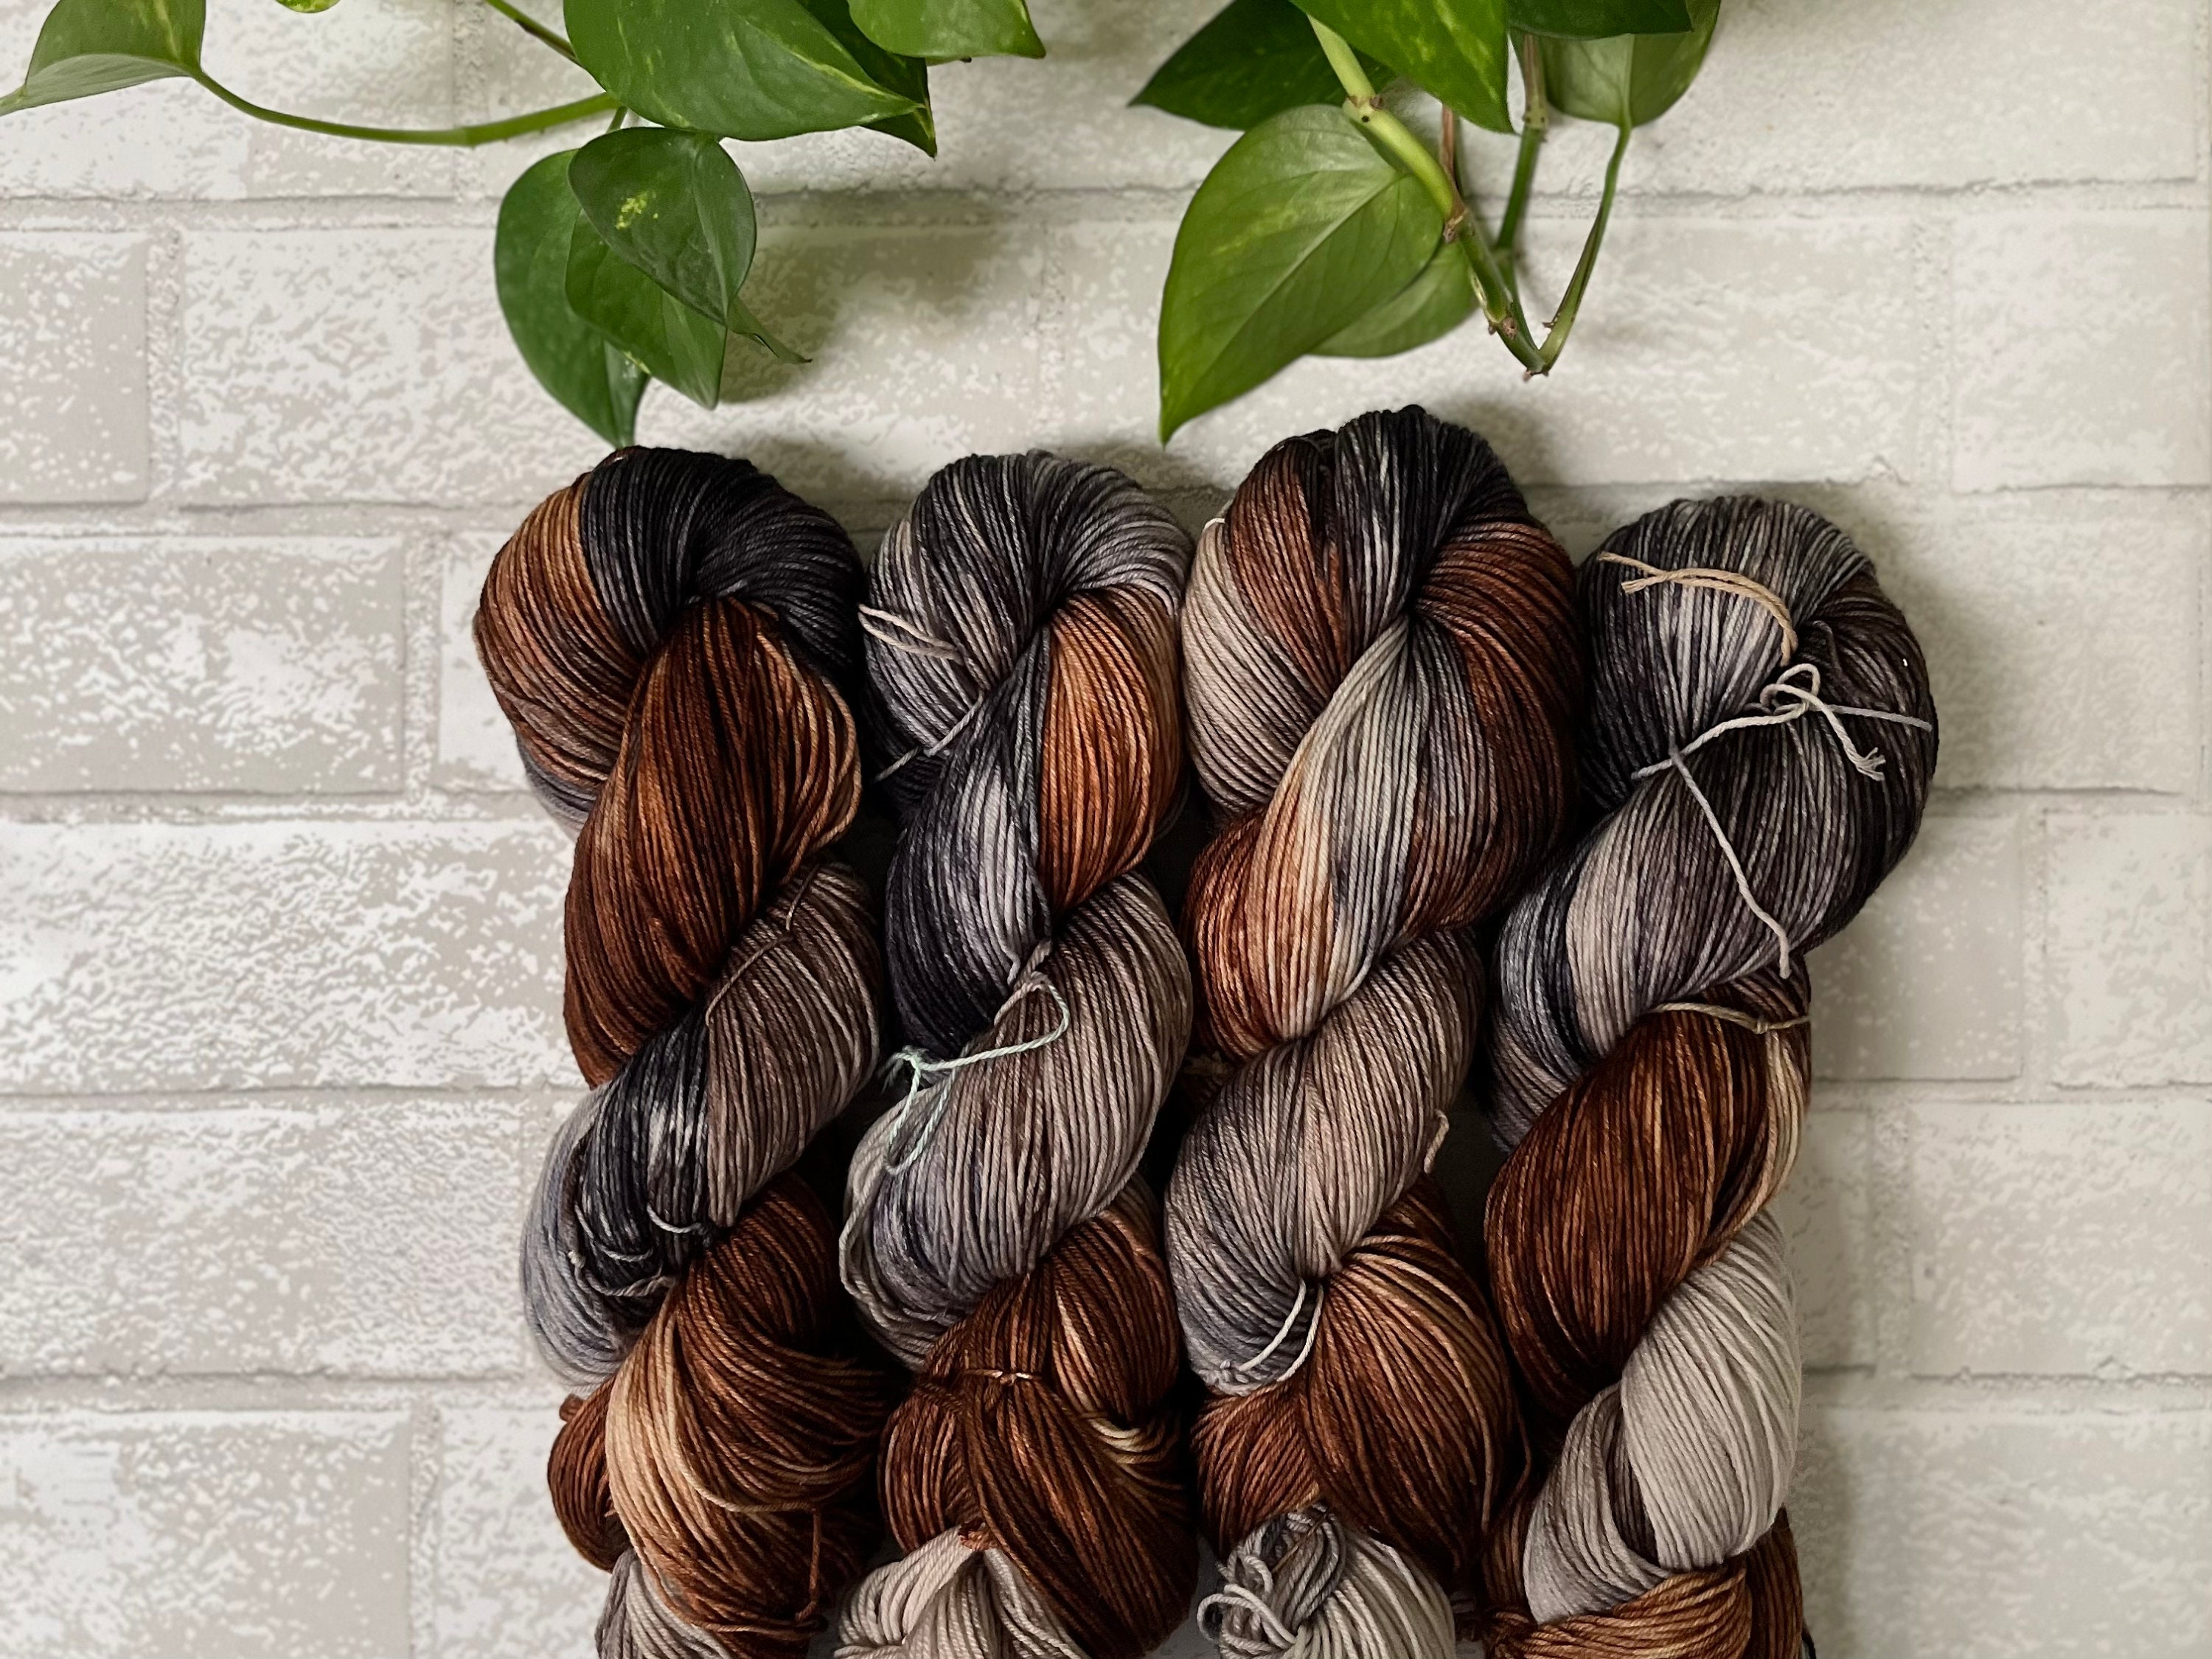 Earth & Sky - Hand dyed yarn - SW Merino Fingering Weight brown carame